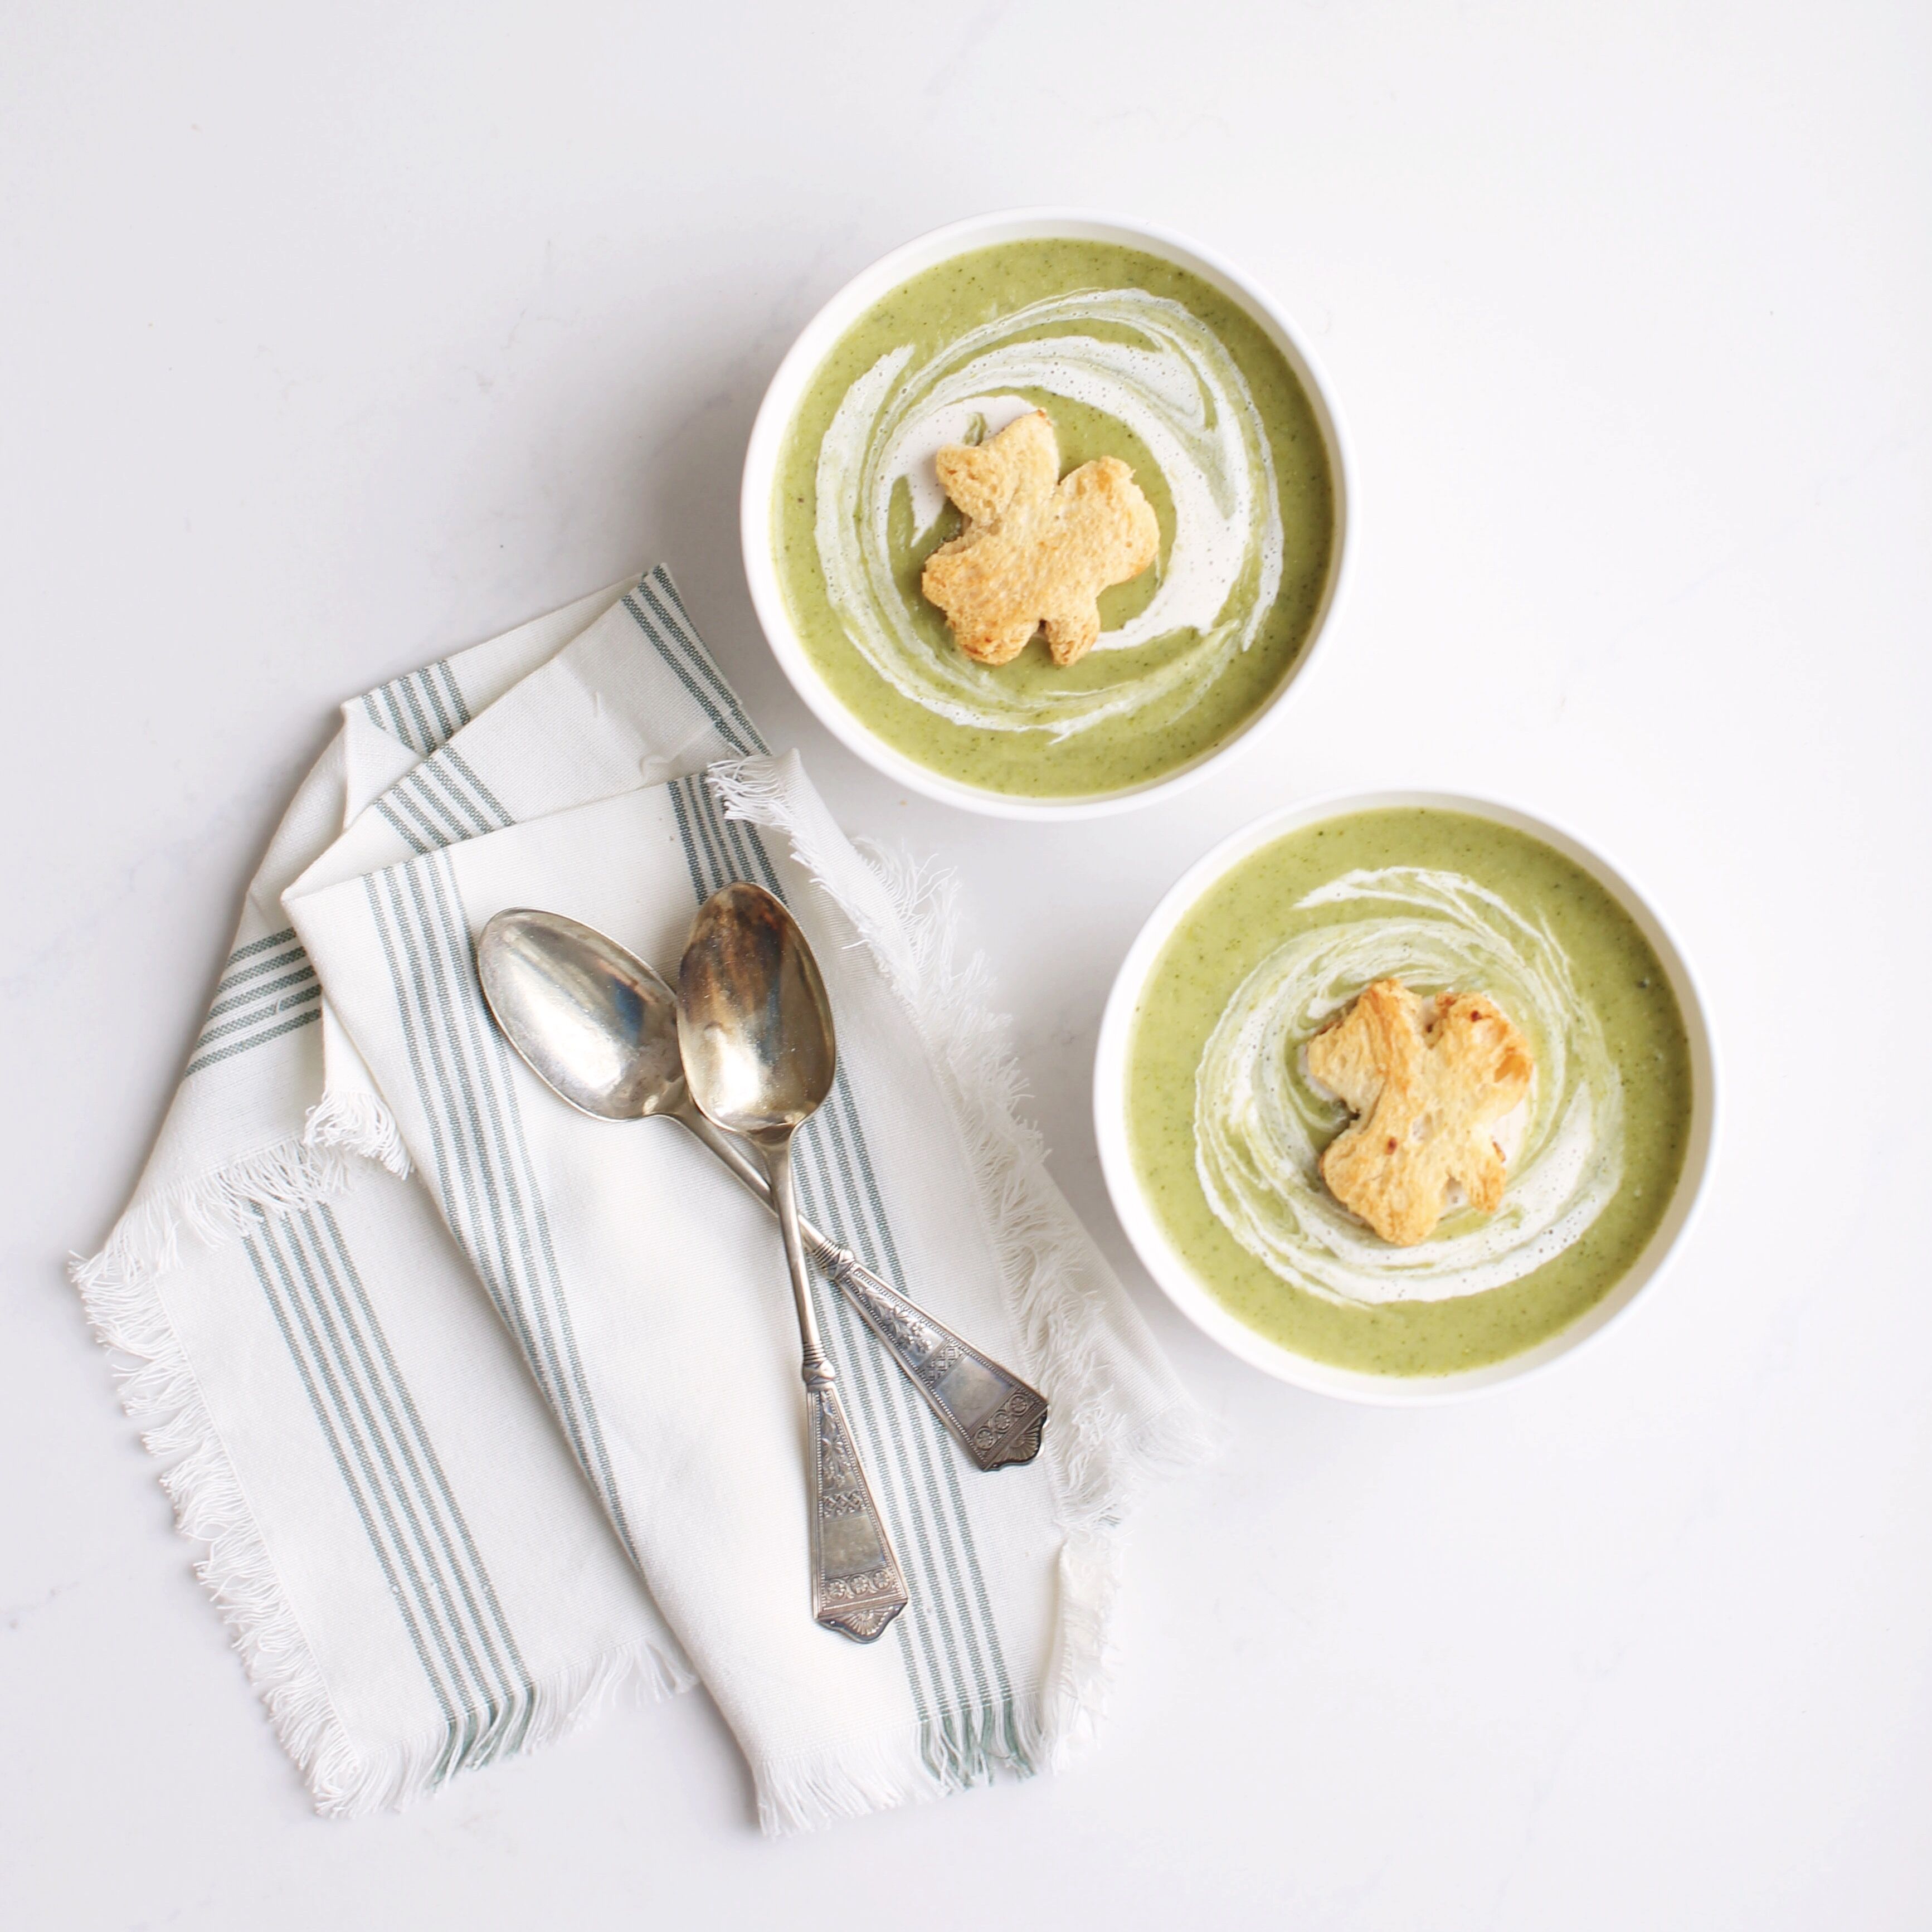 Creamy healthy vegan and gluten free Potato Broccoli Soup with shamrock croutons, perfect for St. Patrick's Day!